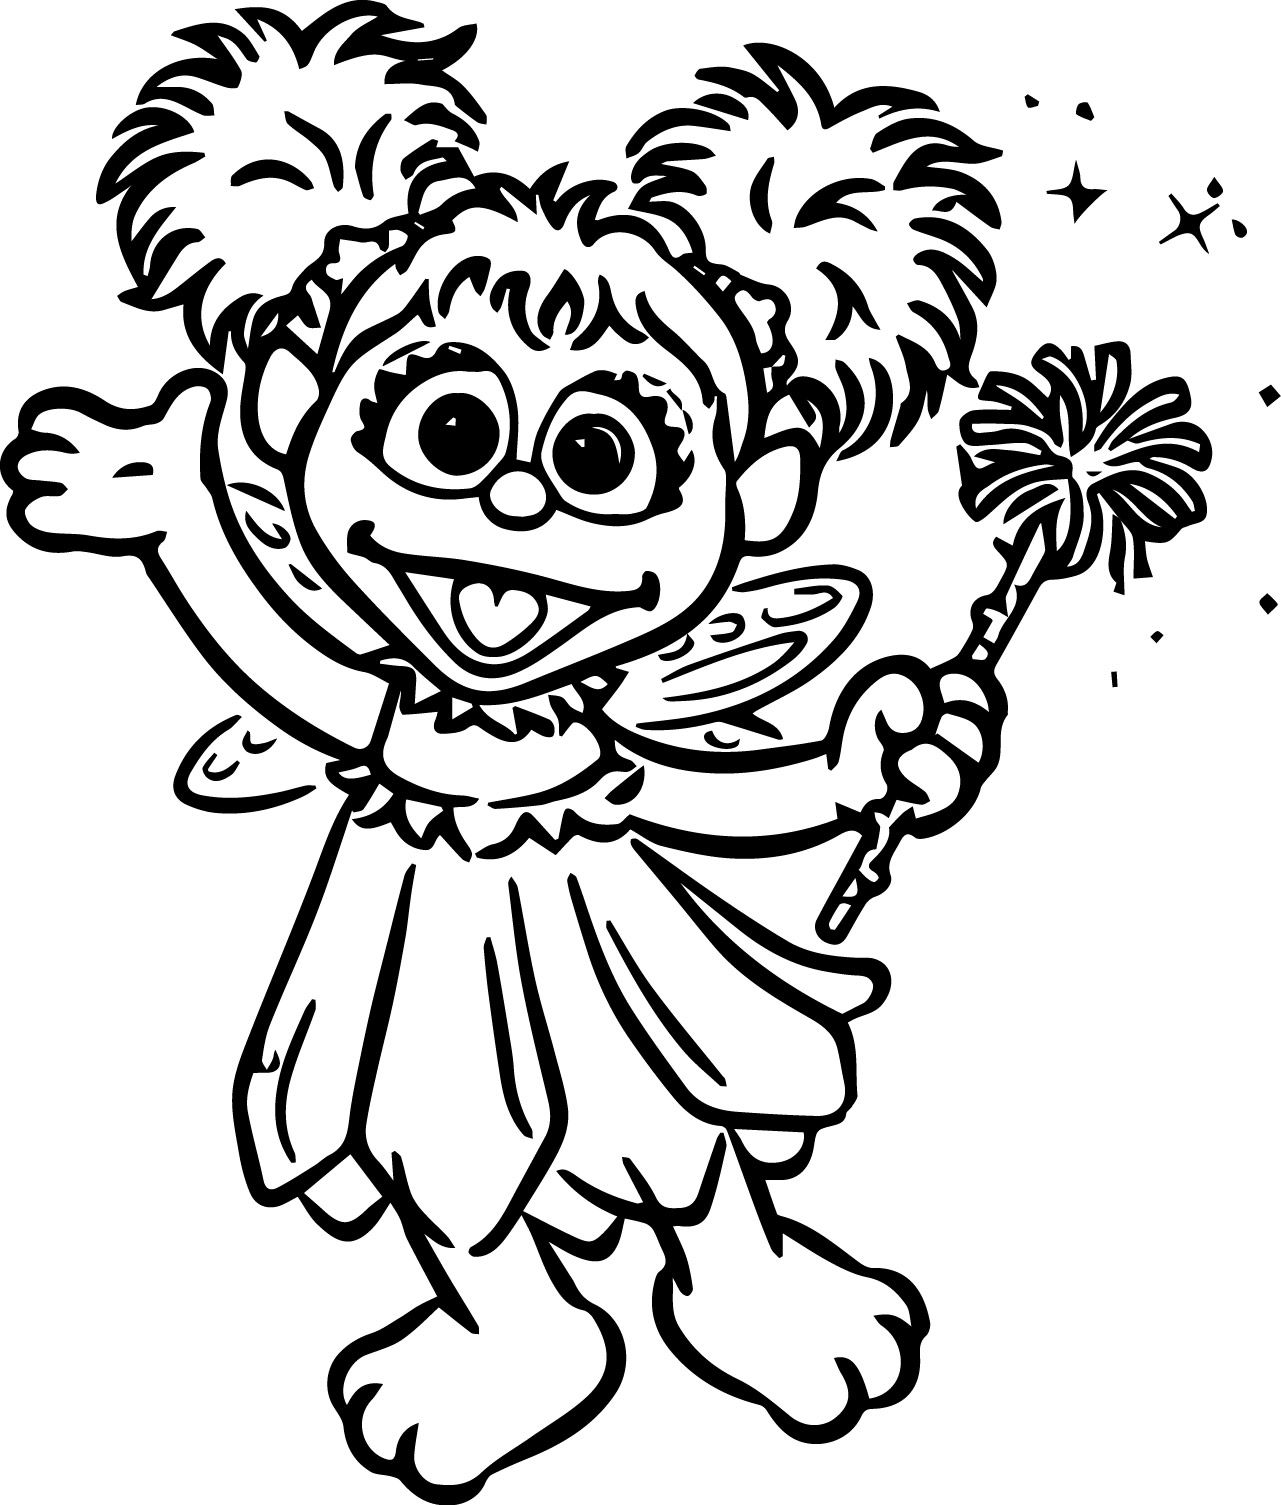 Abby Cadabby Coloring Pages Pdf to Print - Abby Cadabby Coloring Pages